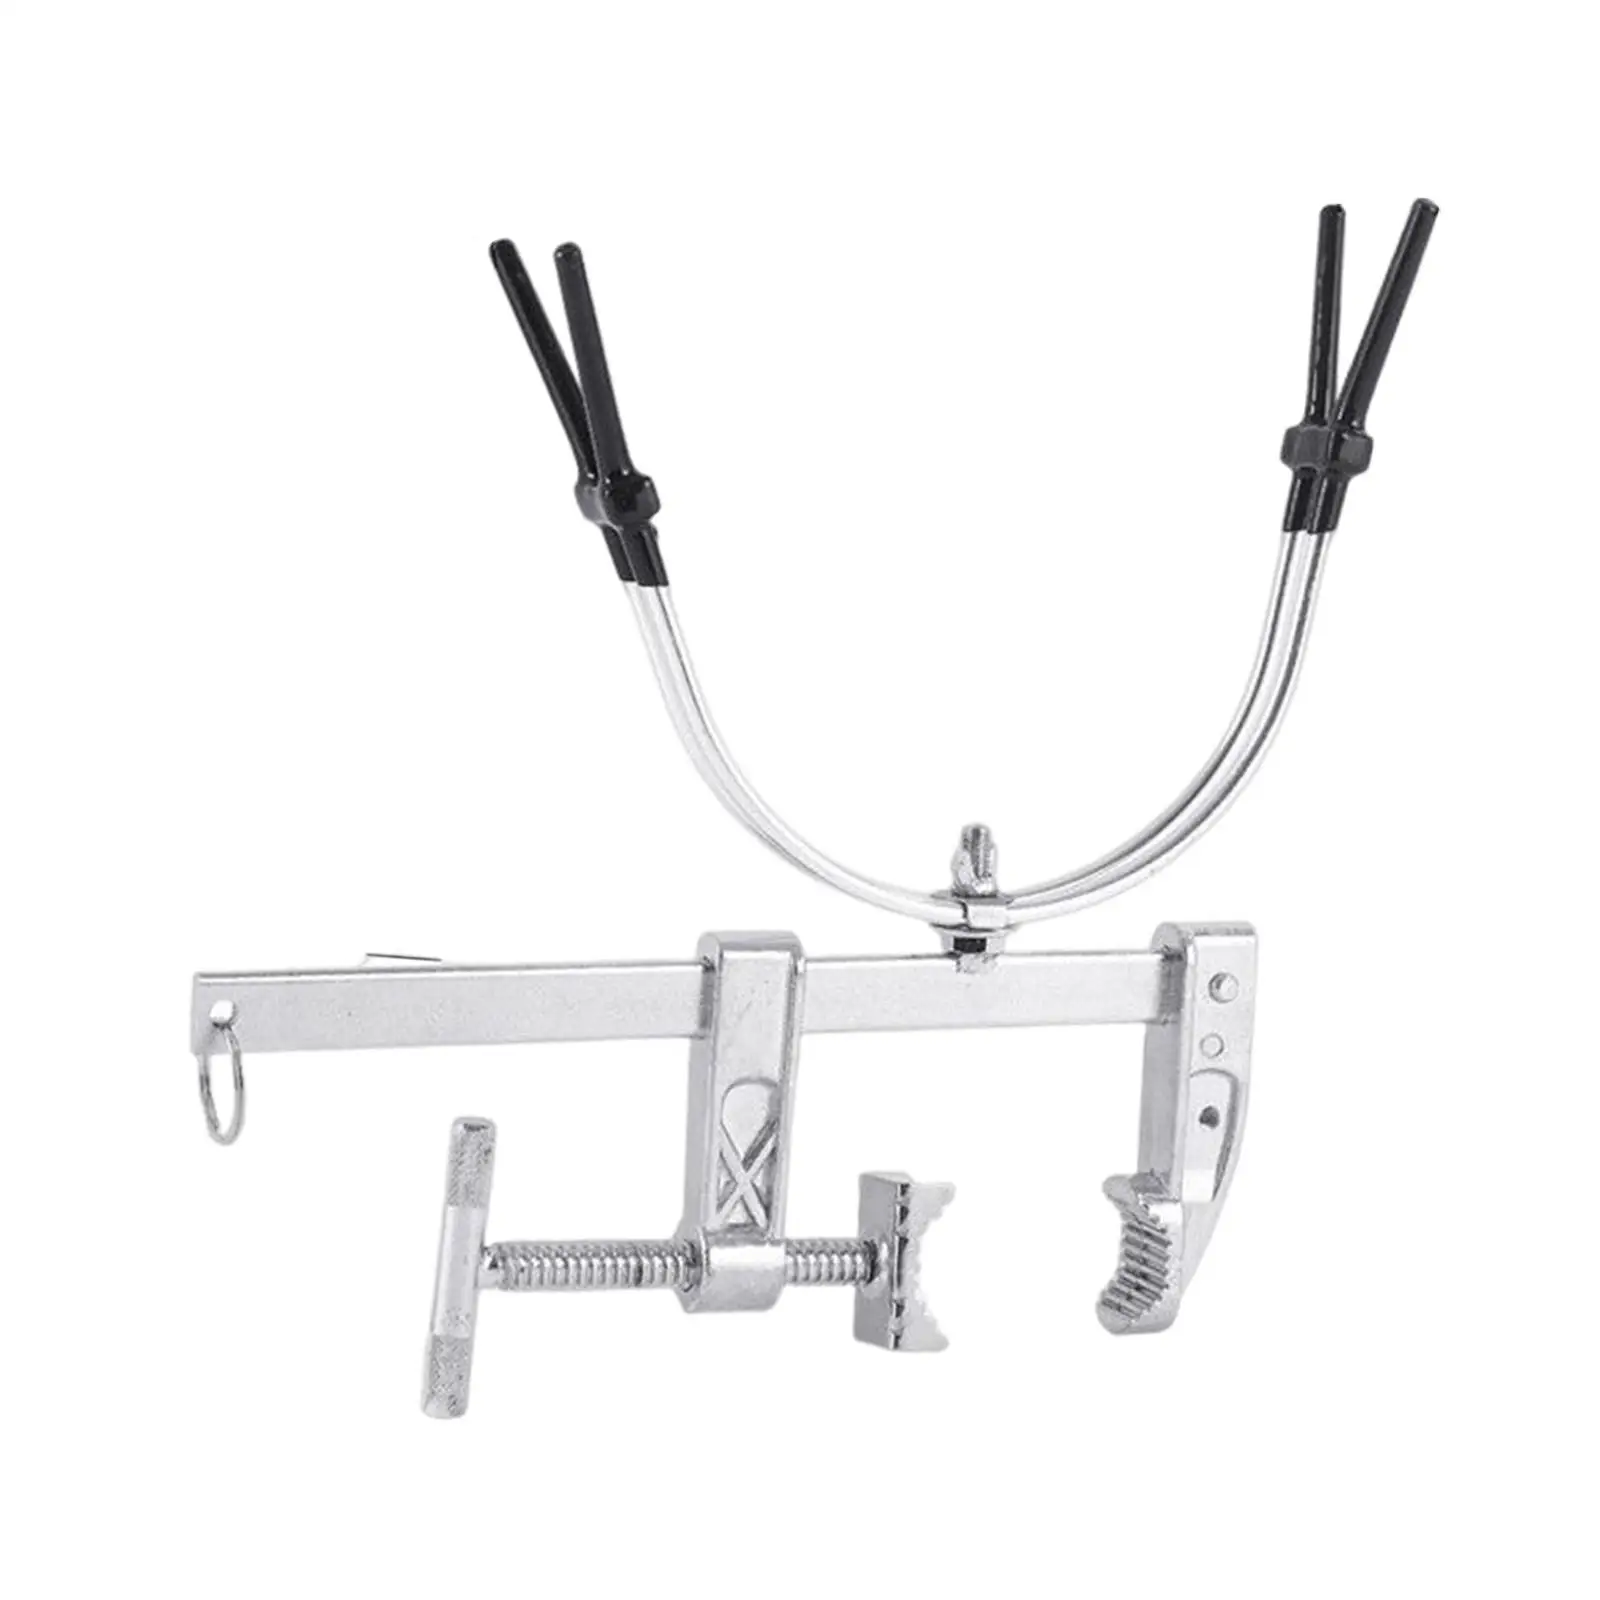 Fishing Rod Bracket Support Stand Fishing Gear Pole Holder for Fishing Accessories